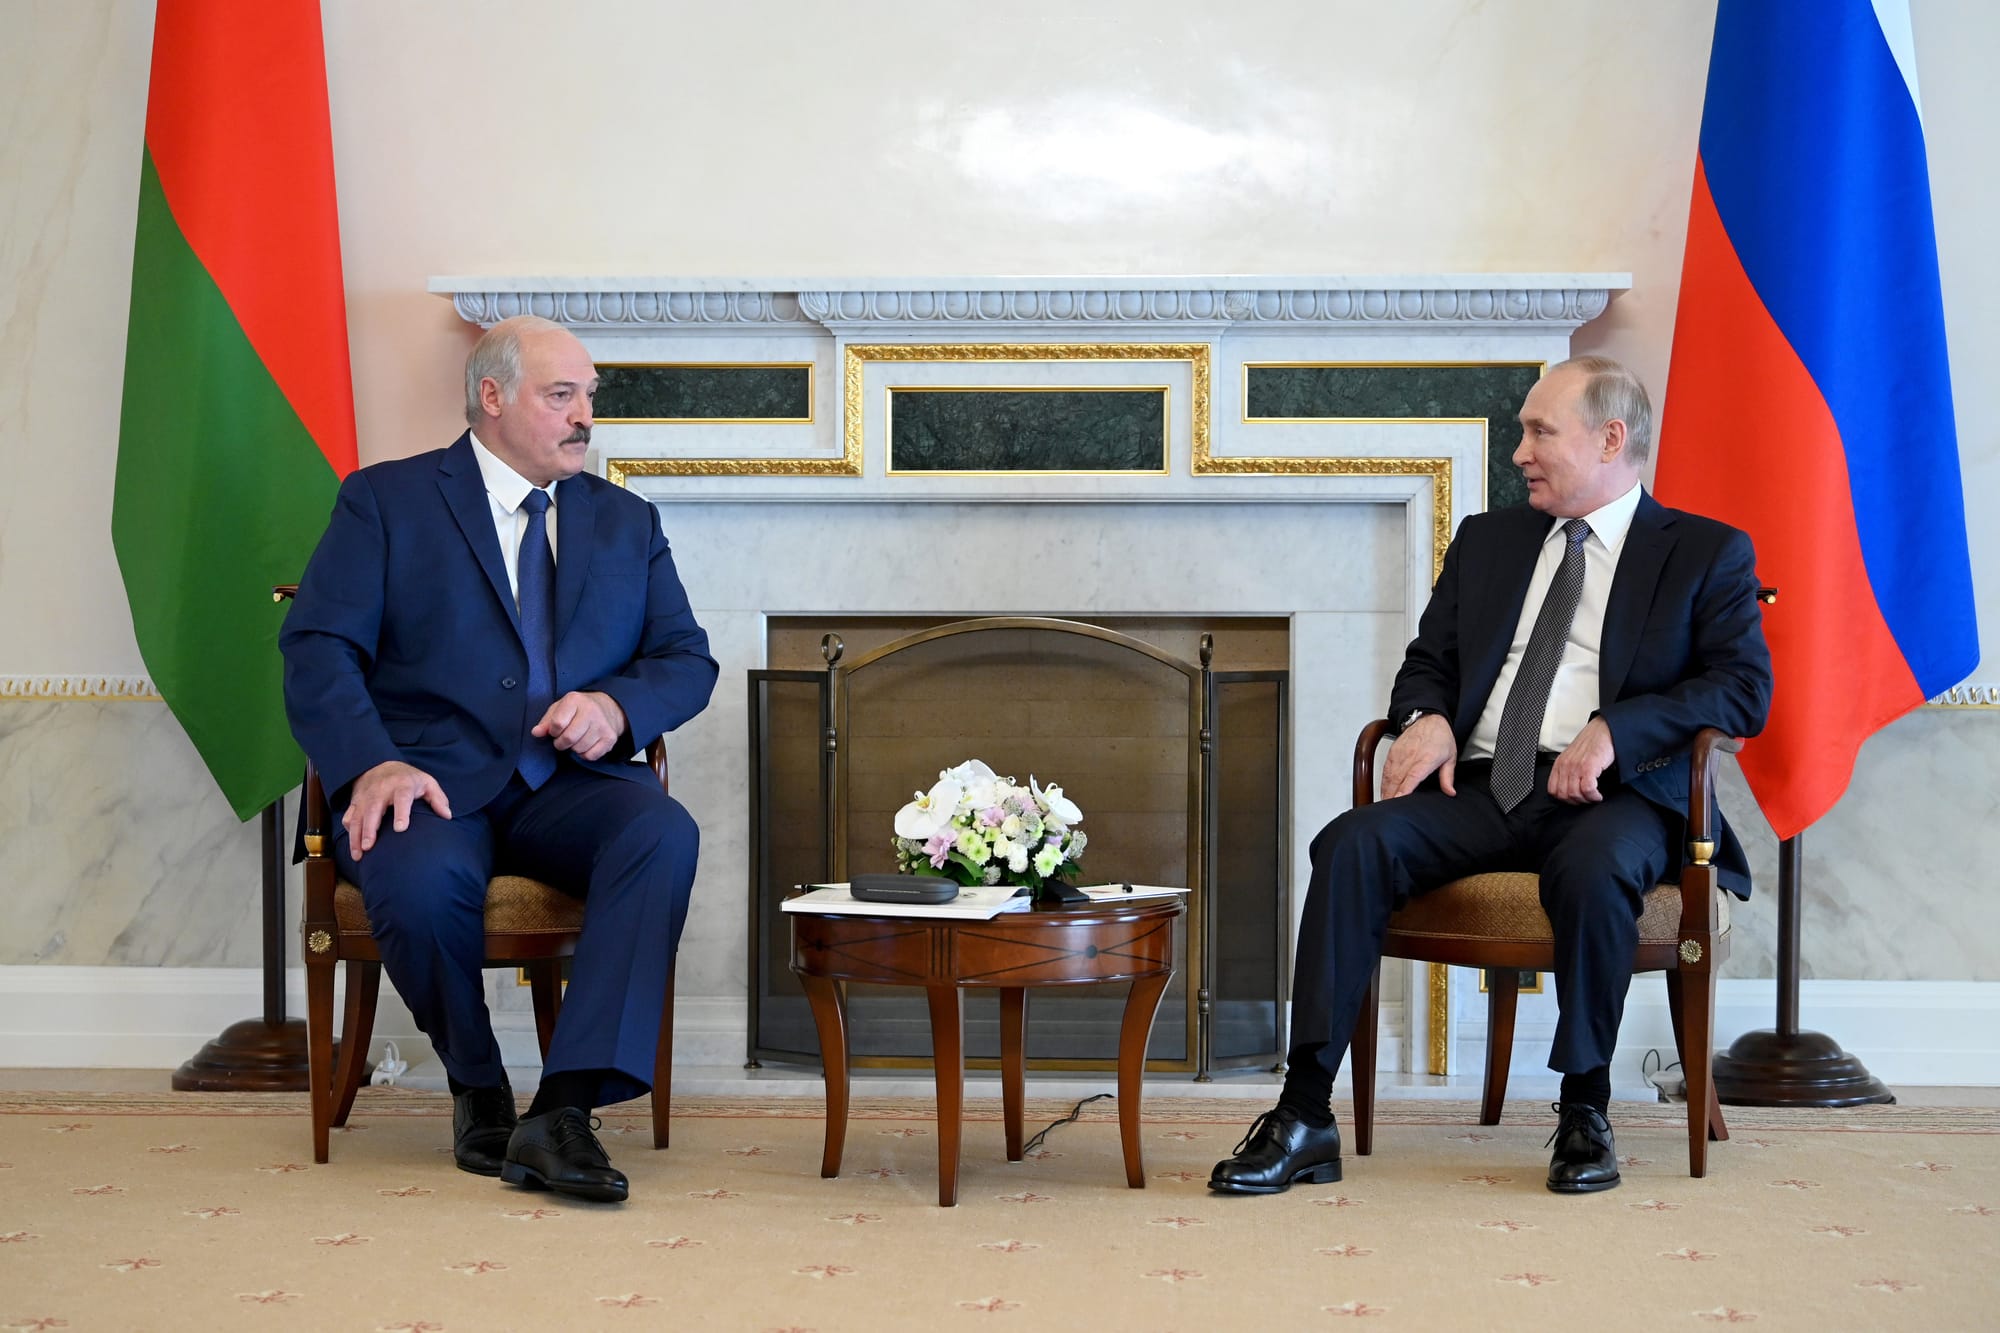 The Union State of Russia and Belarus at the present stage